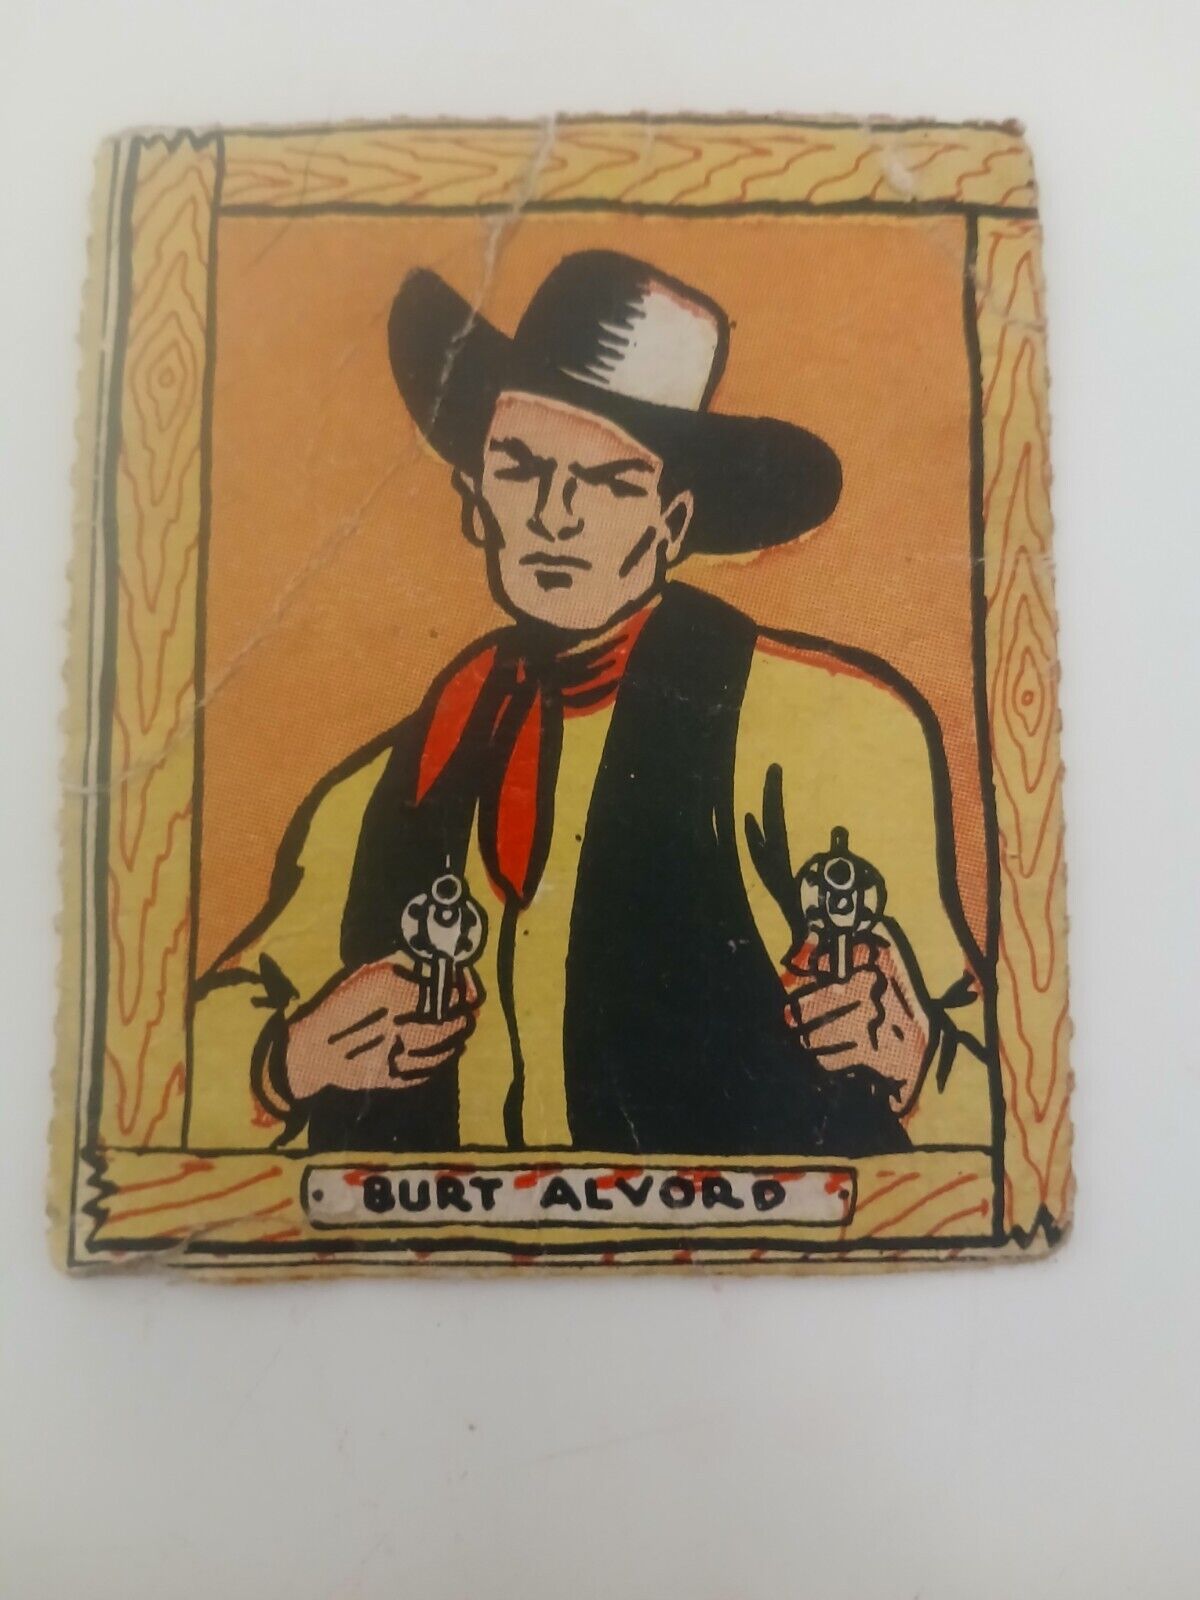 Burt Alvord 1950s Novel Candy And Toys Trading Card # 12 I Wild West Adventures